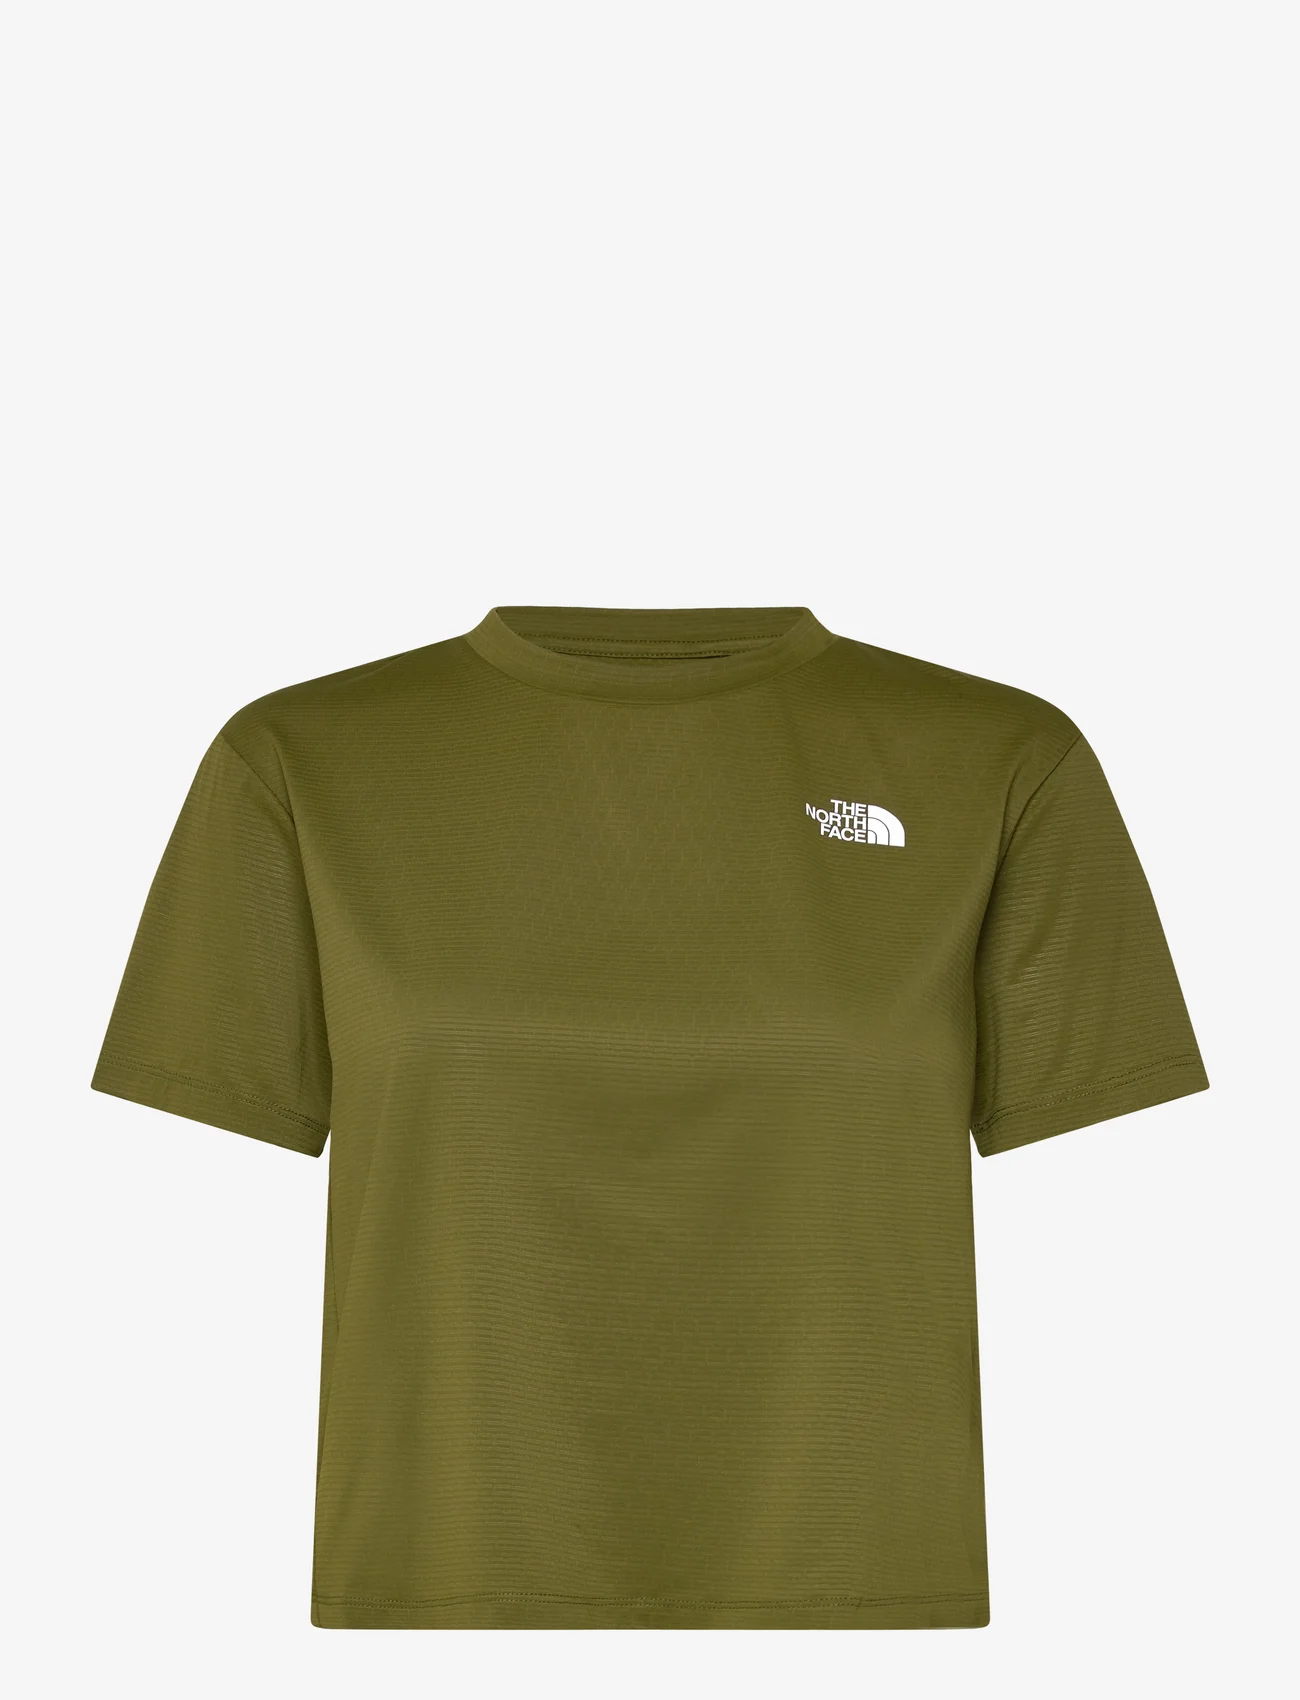 The North Face - W FLEX CIRCUIT S/S TEE - t-skjorter - forest olive - 0